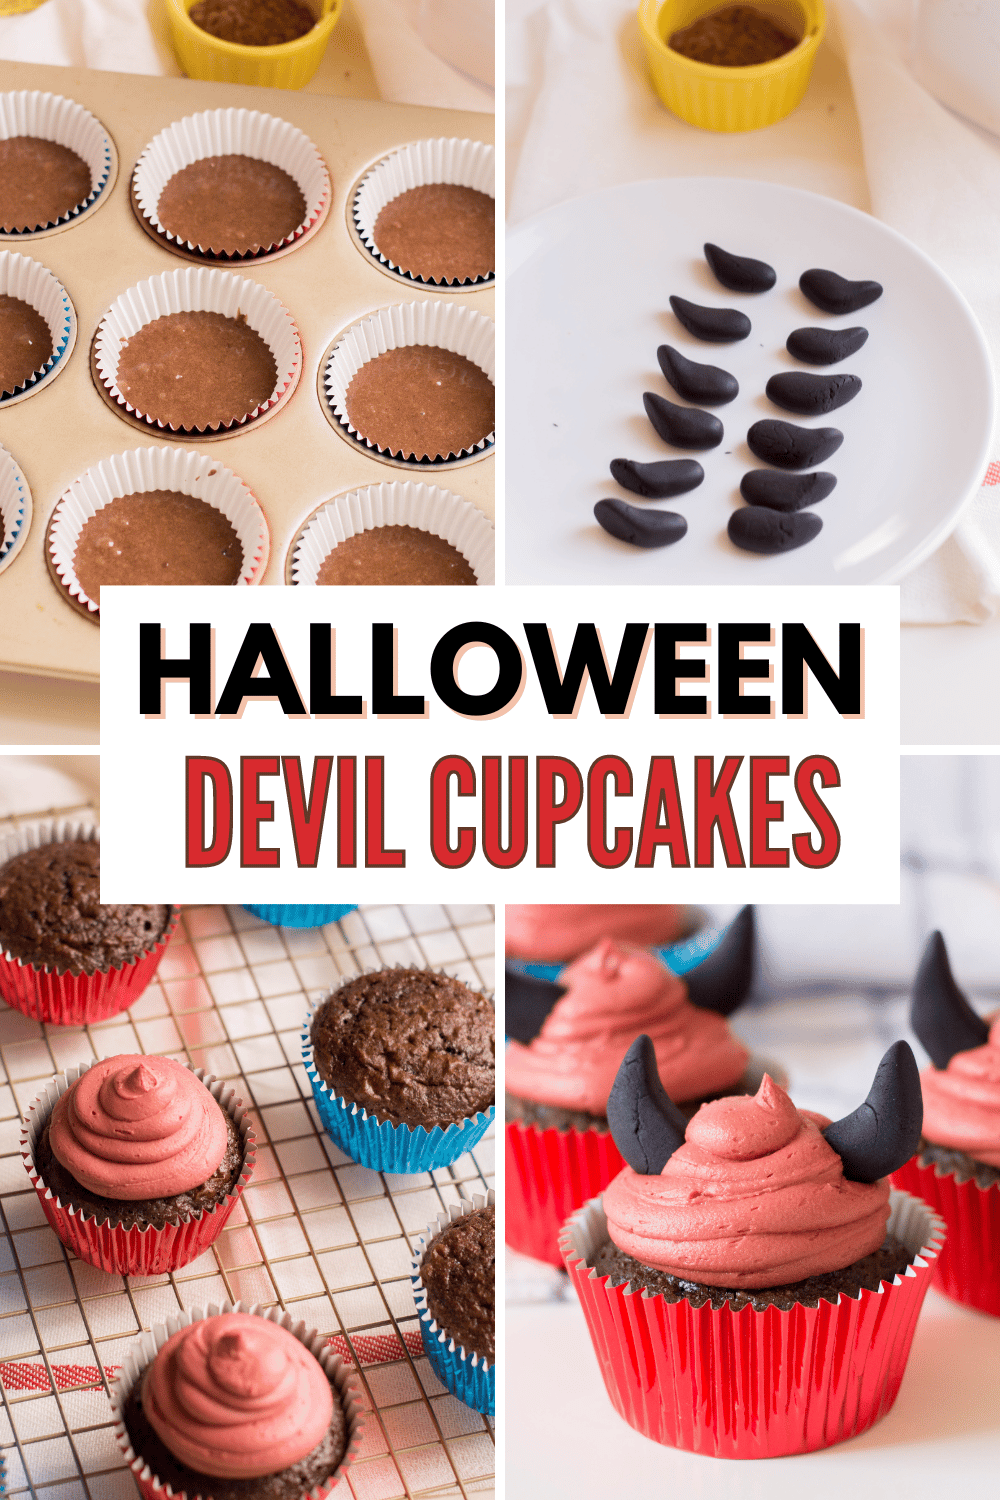 These Halloween Devil Cupcakes are the perfect sweet treat for your Halloween party! They're easy to make and will be a hit with your guests! #halloweendevilcupcakes #halloweencupcakes #devilcupcakes #halloween #recipe via @wondermomwannab